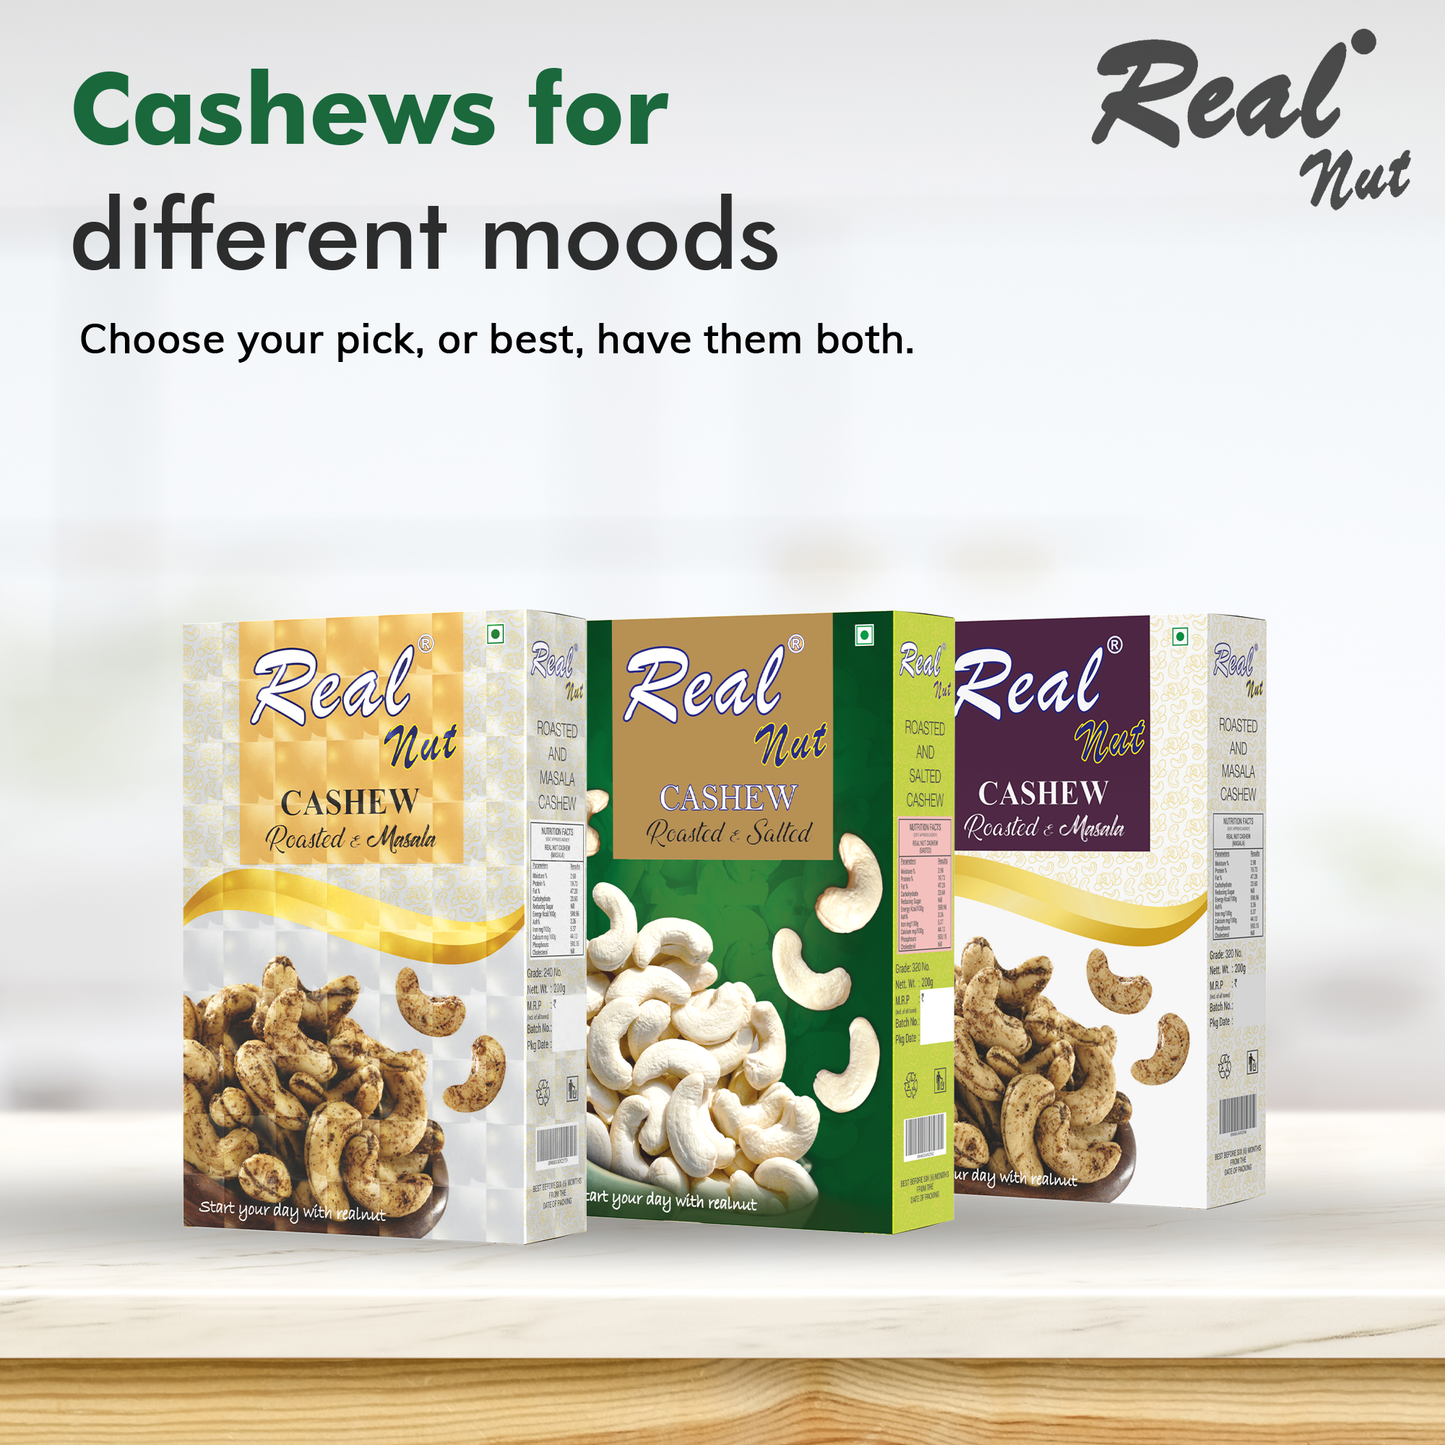 CASHEW ROASTED & SALTED (Green) 250g